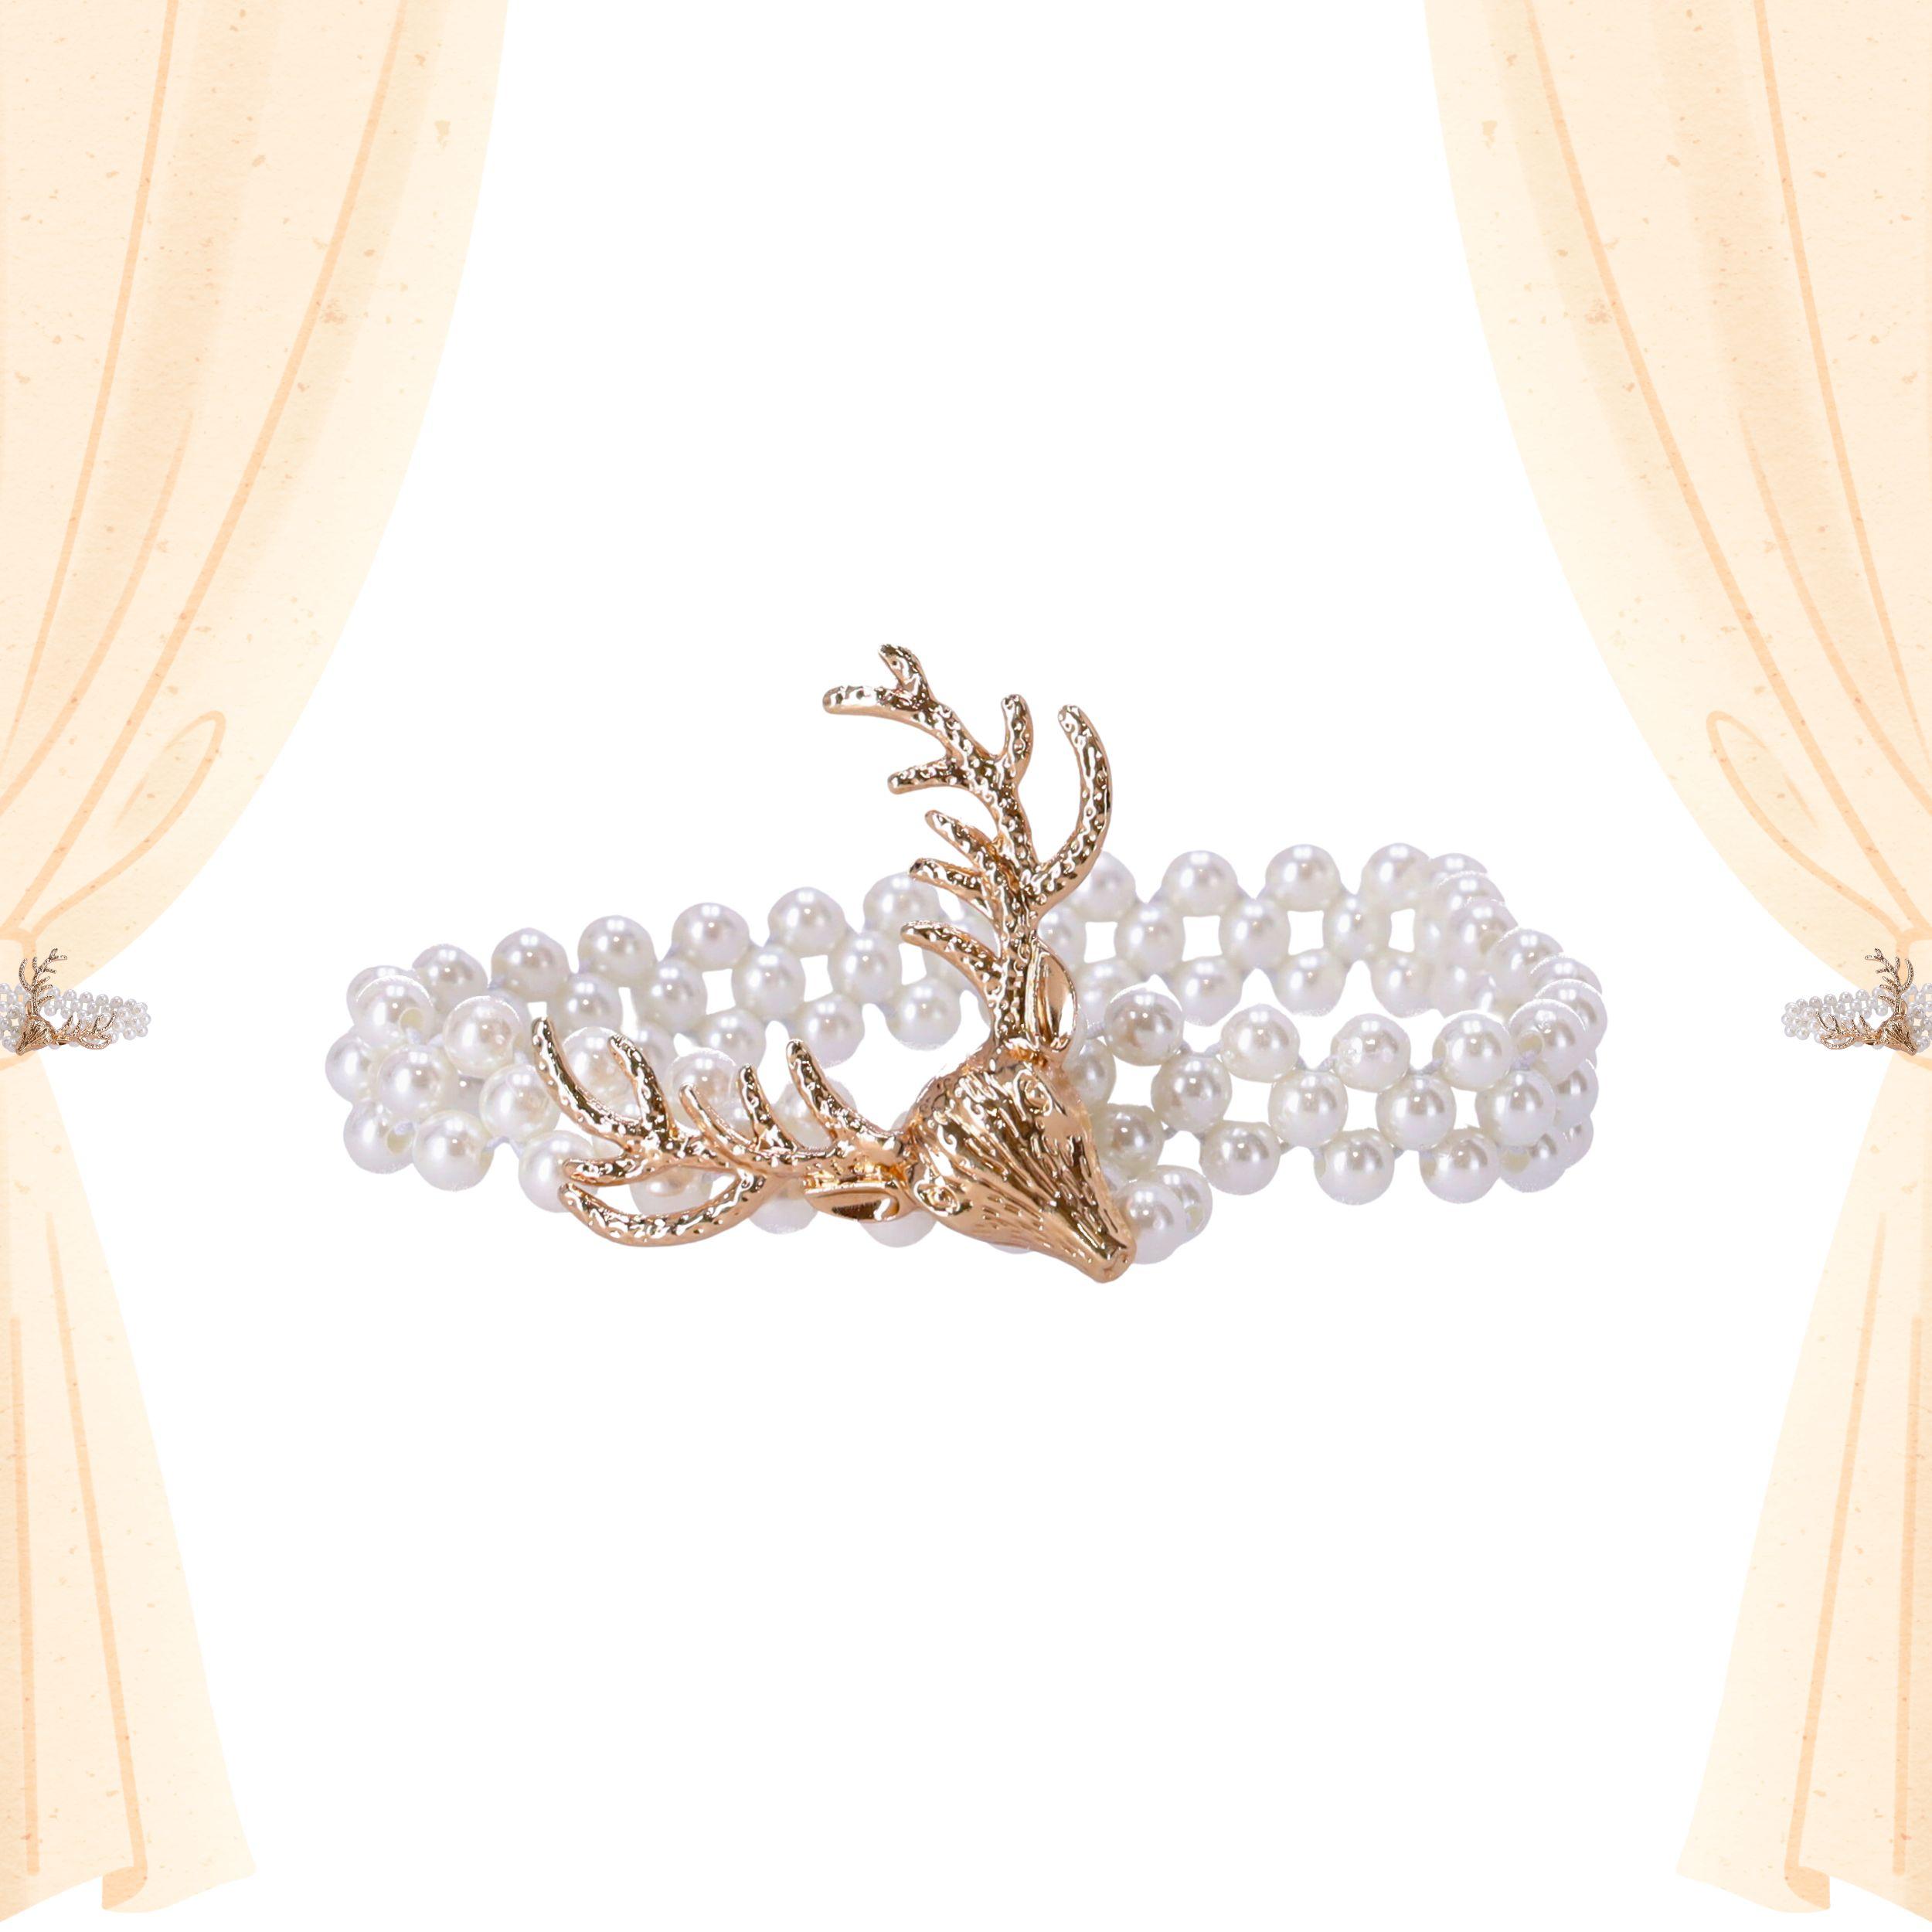 Pearl brace for curtains, curtains with decorative deer